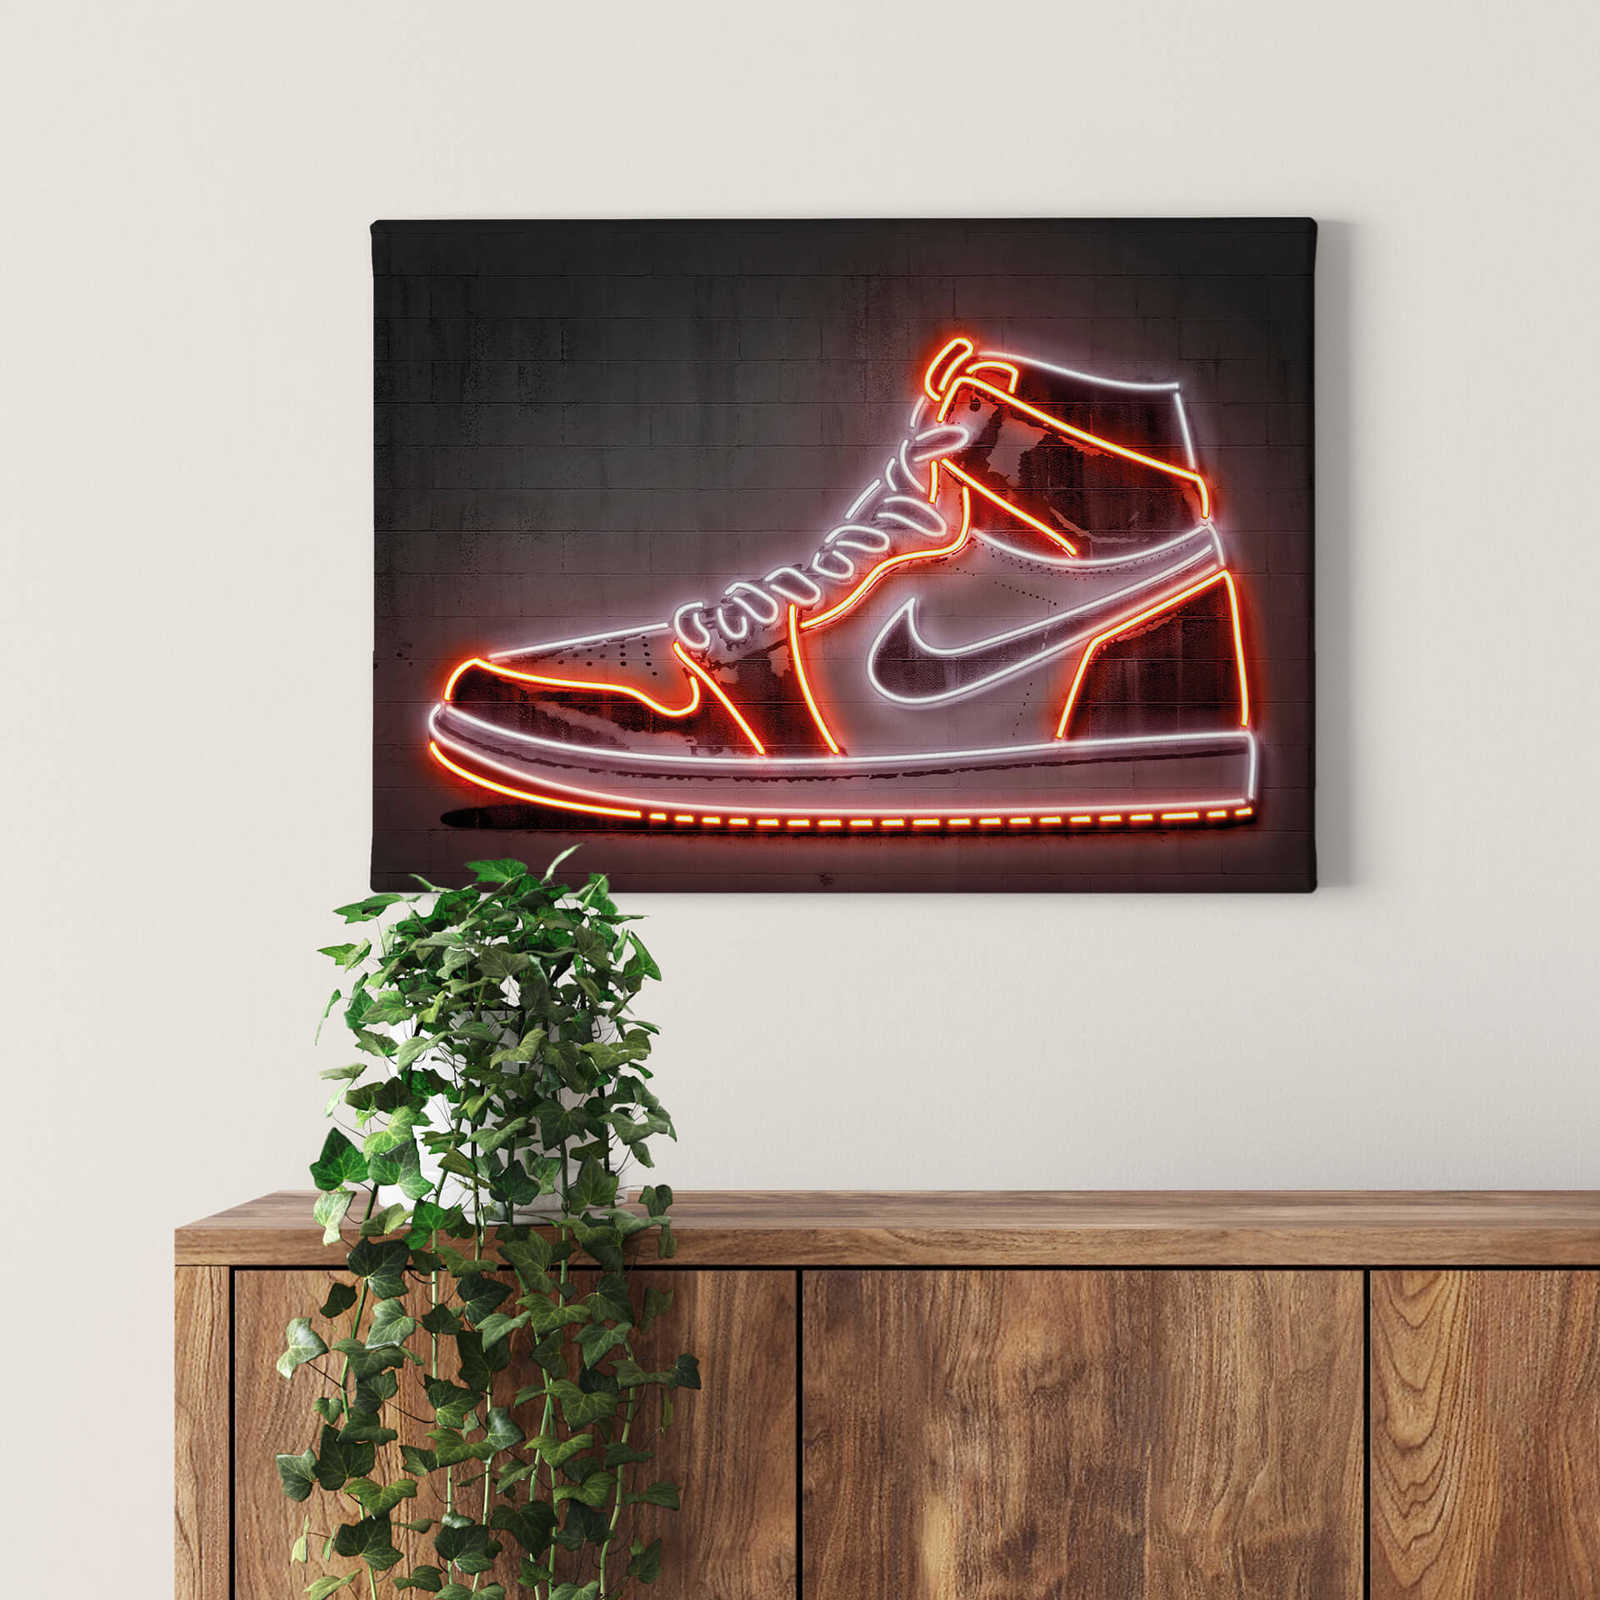             Canvas print neon sign "Sneaker" by Mielu
        